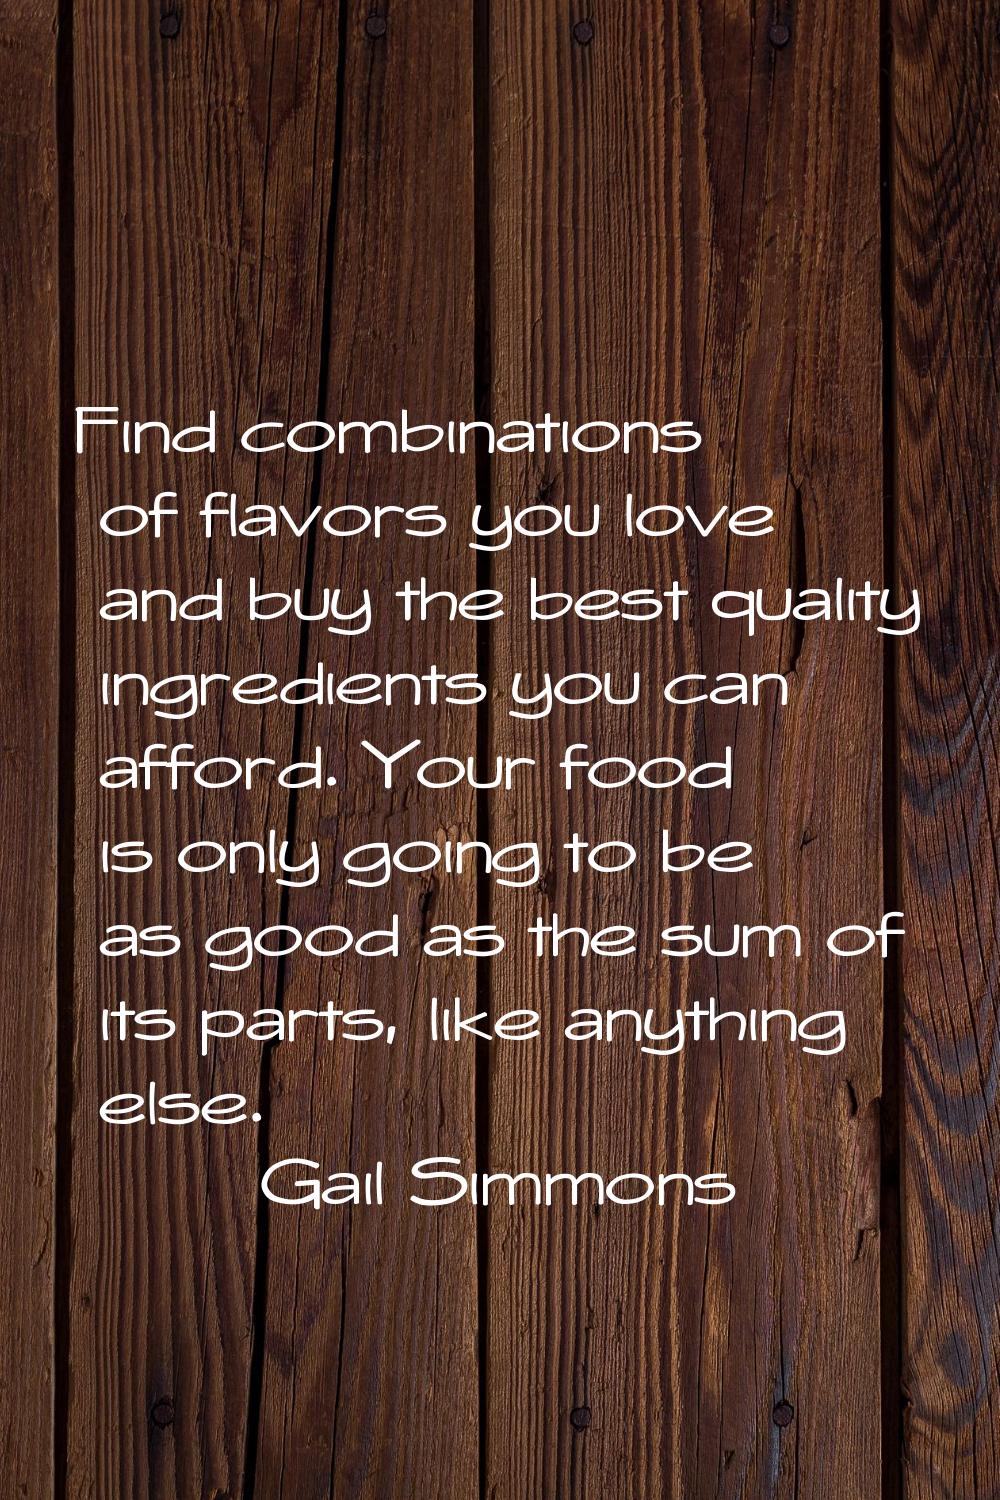 Find combinations of flavors you love and buy the best quality ingredients you can afford. Your foo